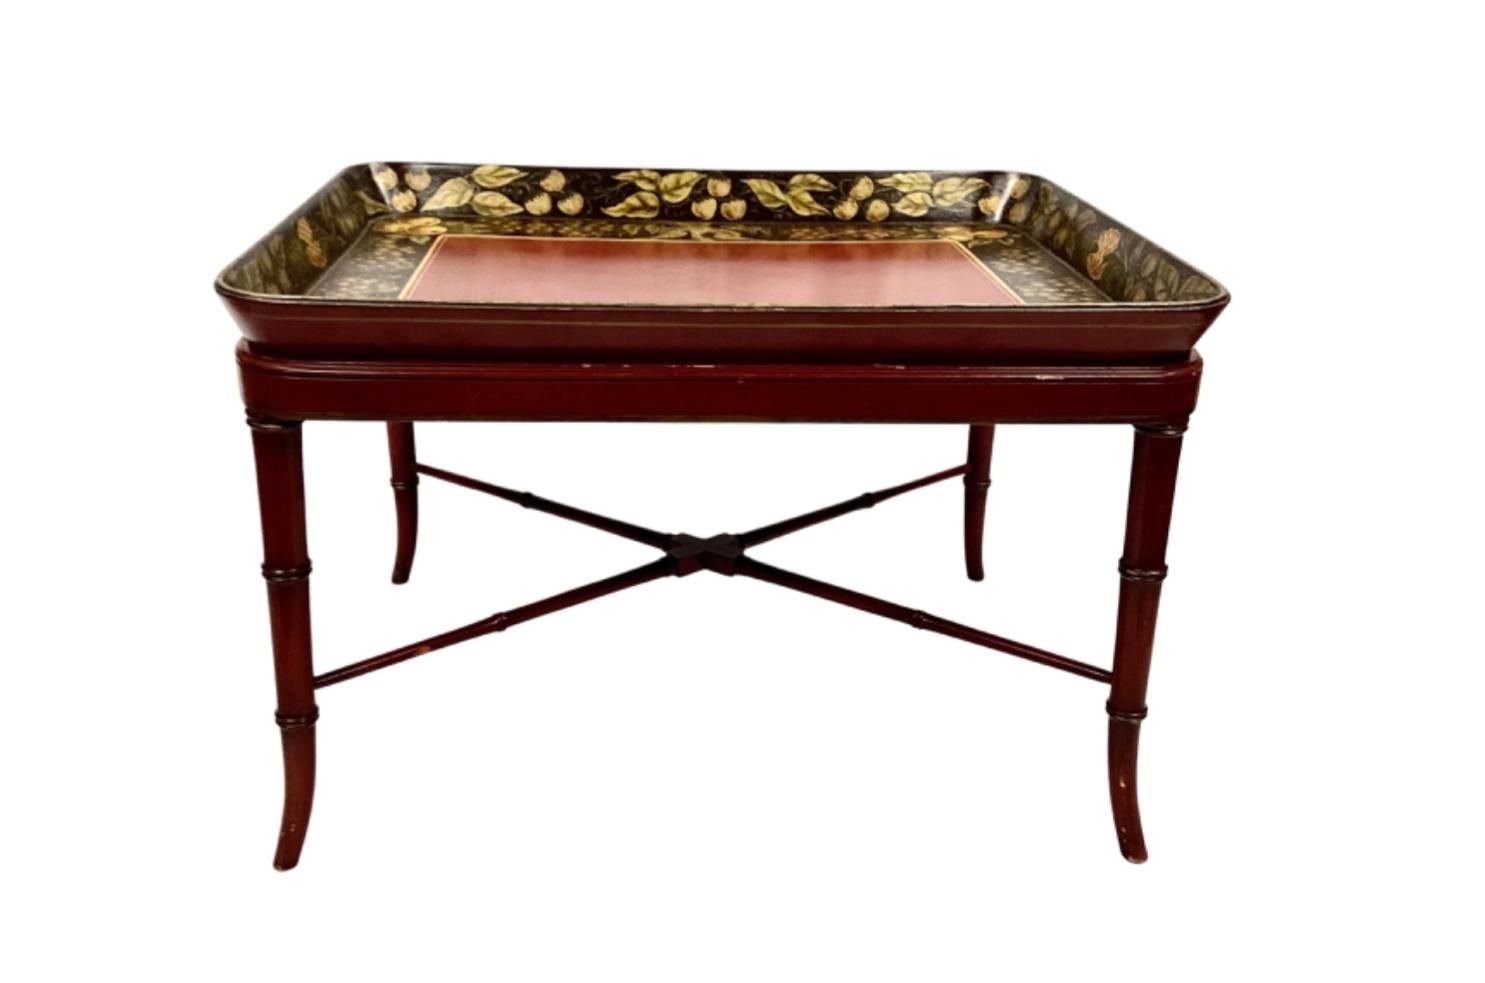 Regency 19th Century Red Lacquered Tray Table on Faux Bamboo Stand